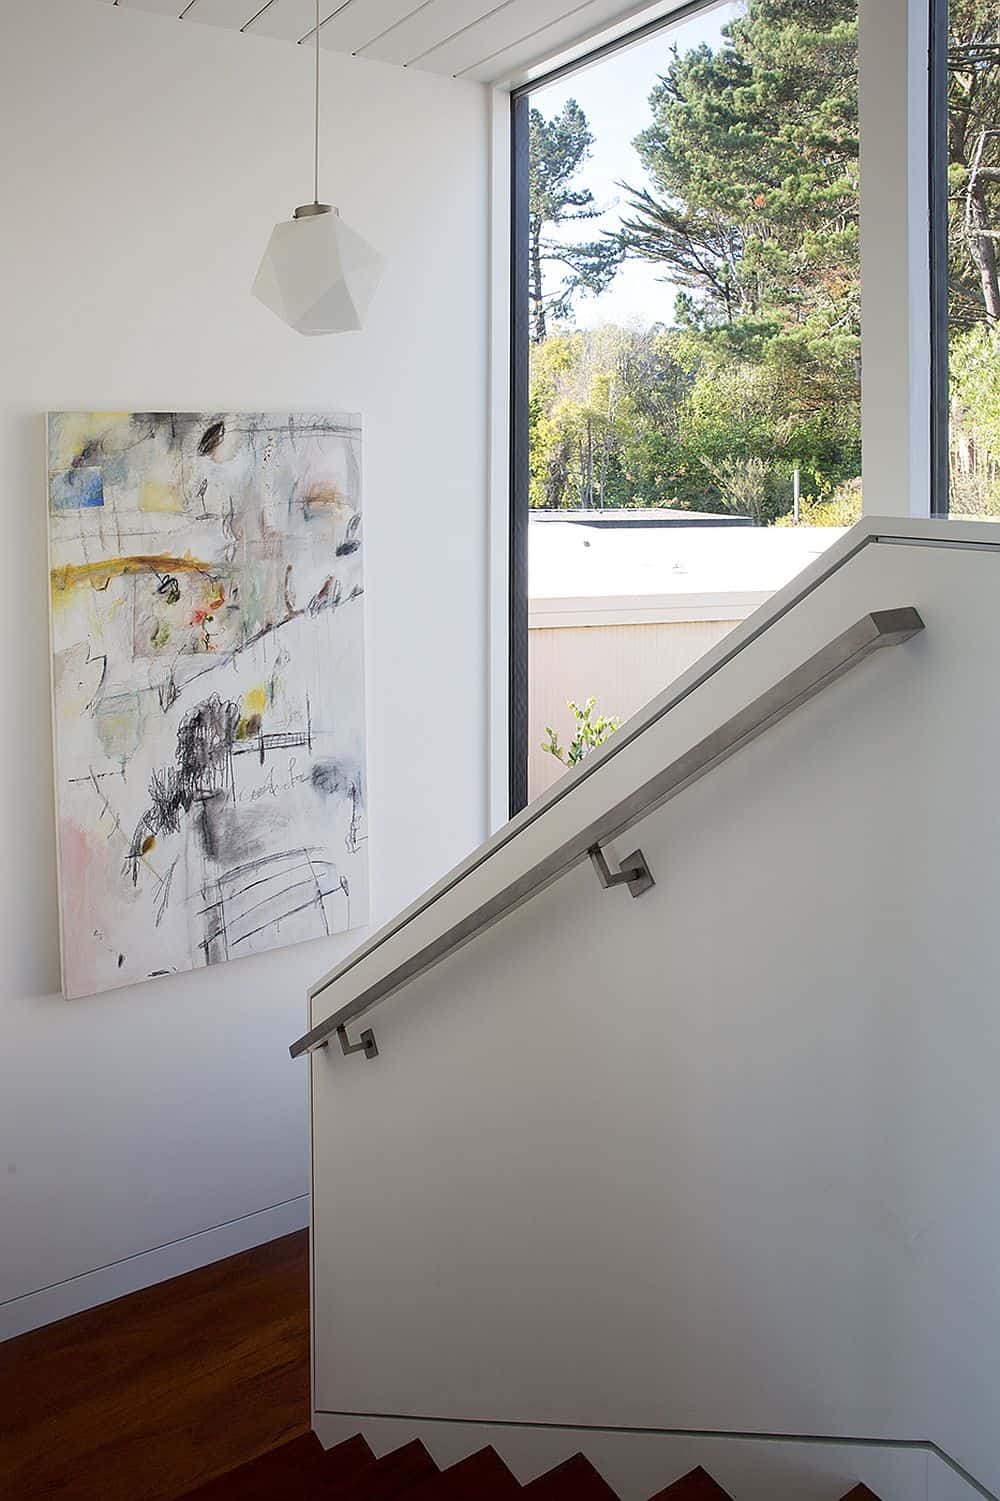 Staircase block overlooks the inner courtyard and features an artwork